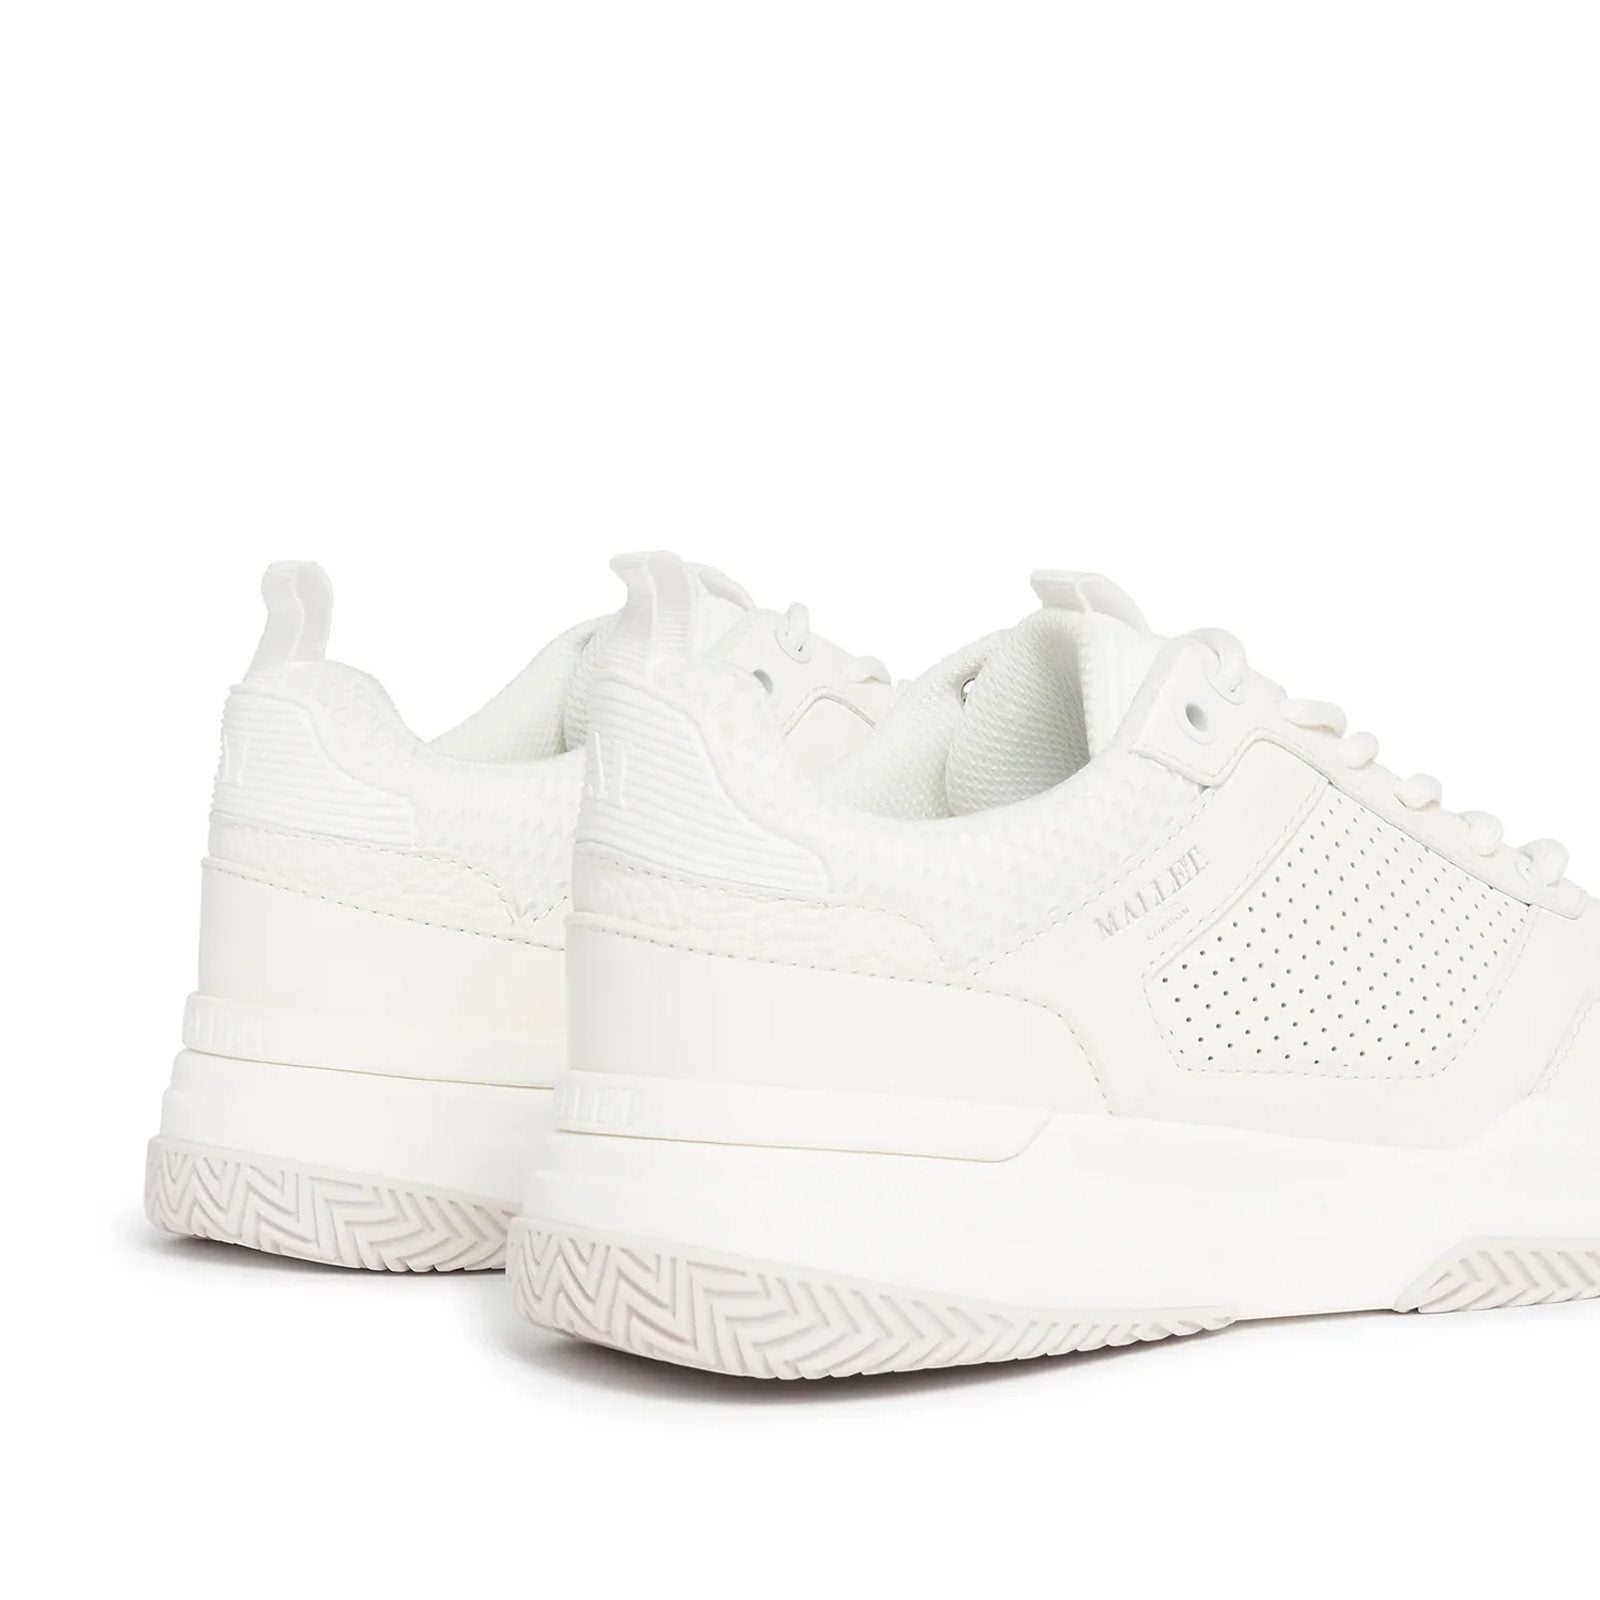 Radnor low-top sneakers